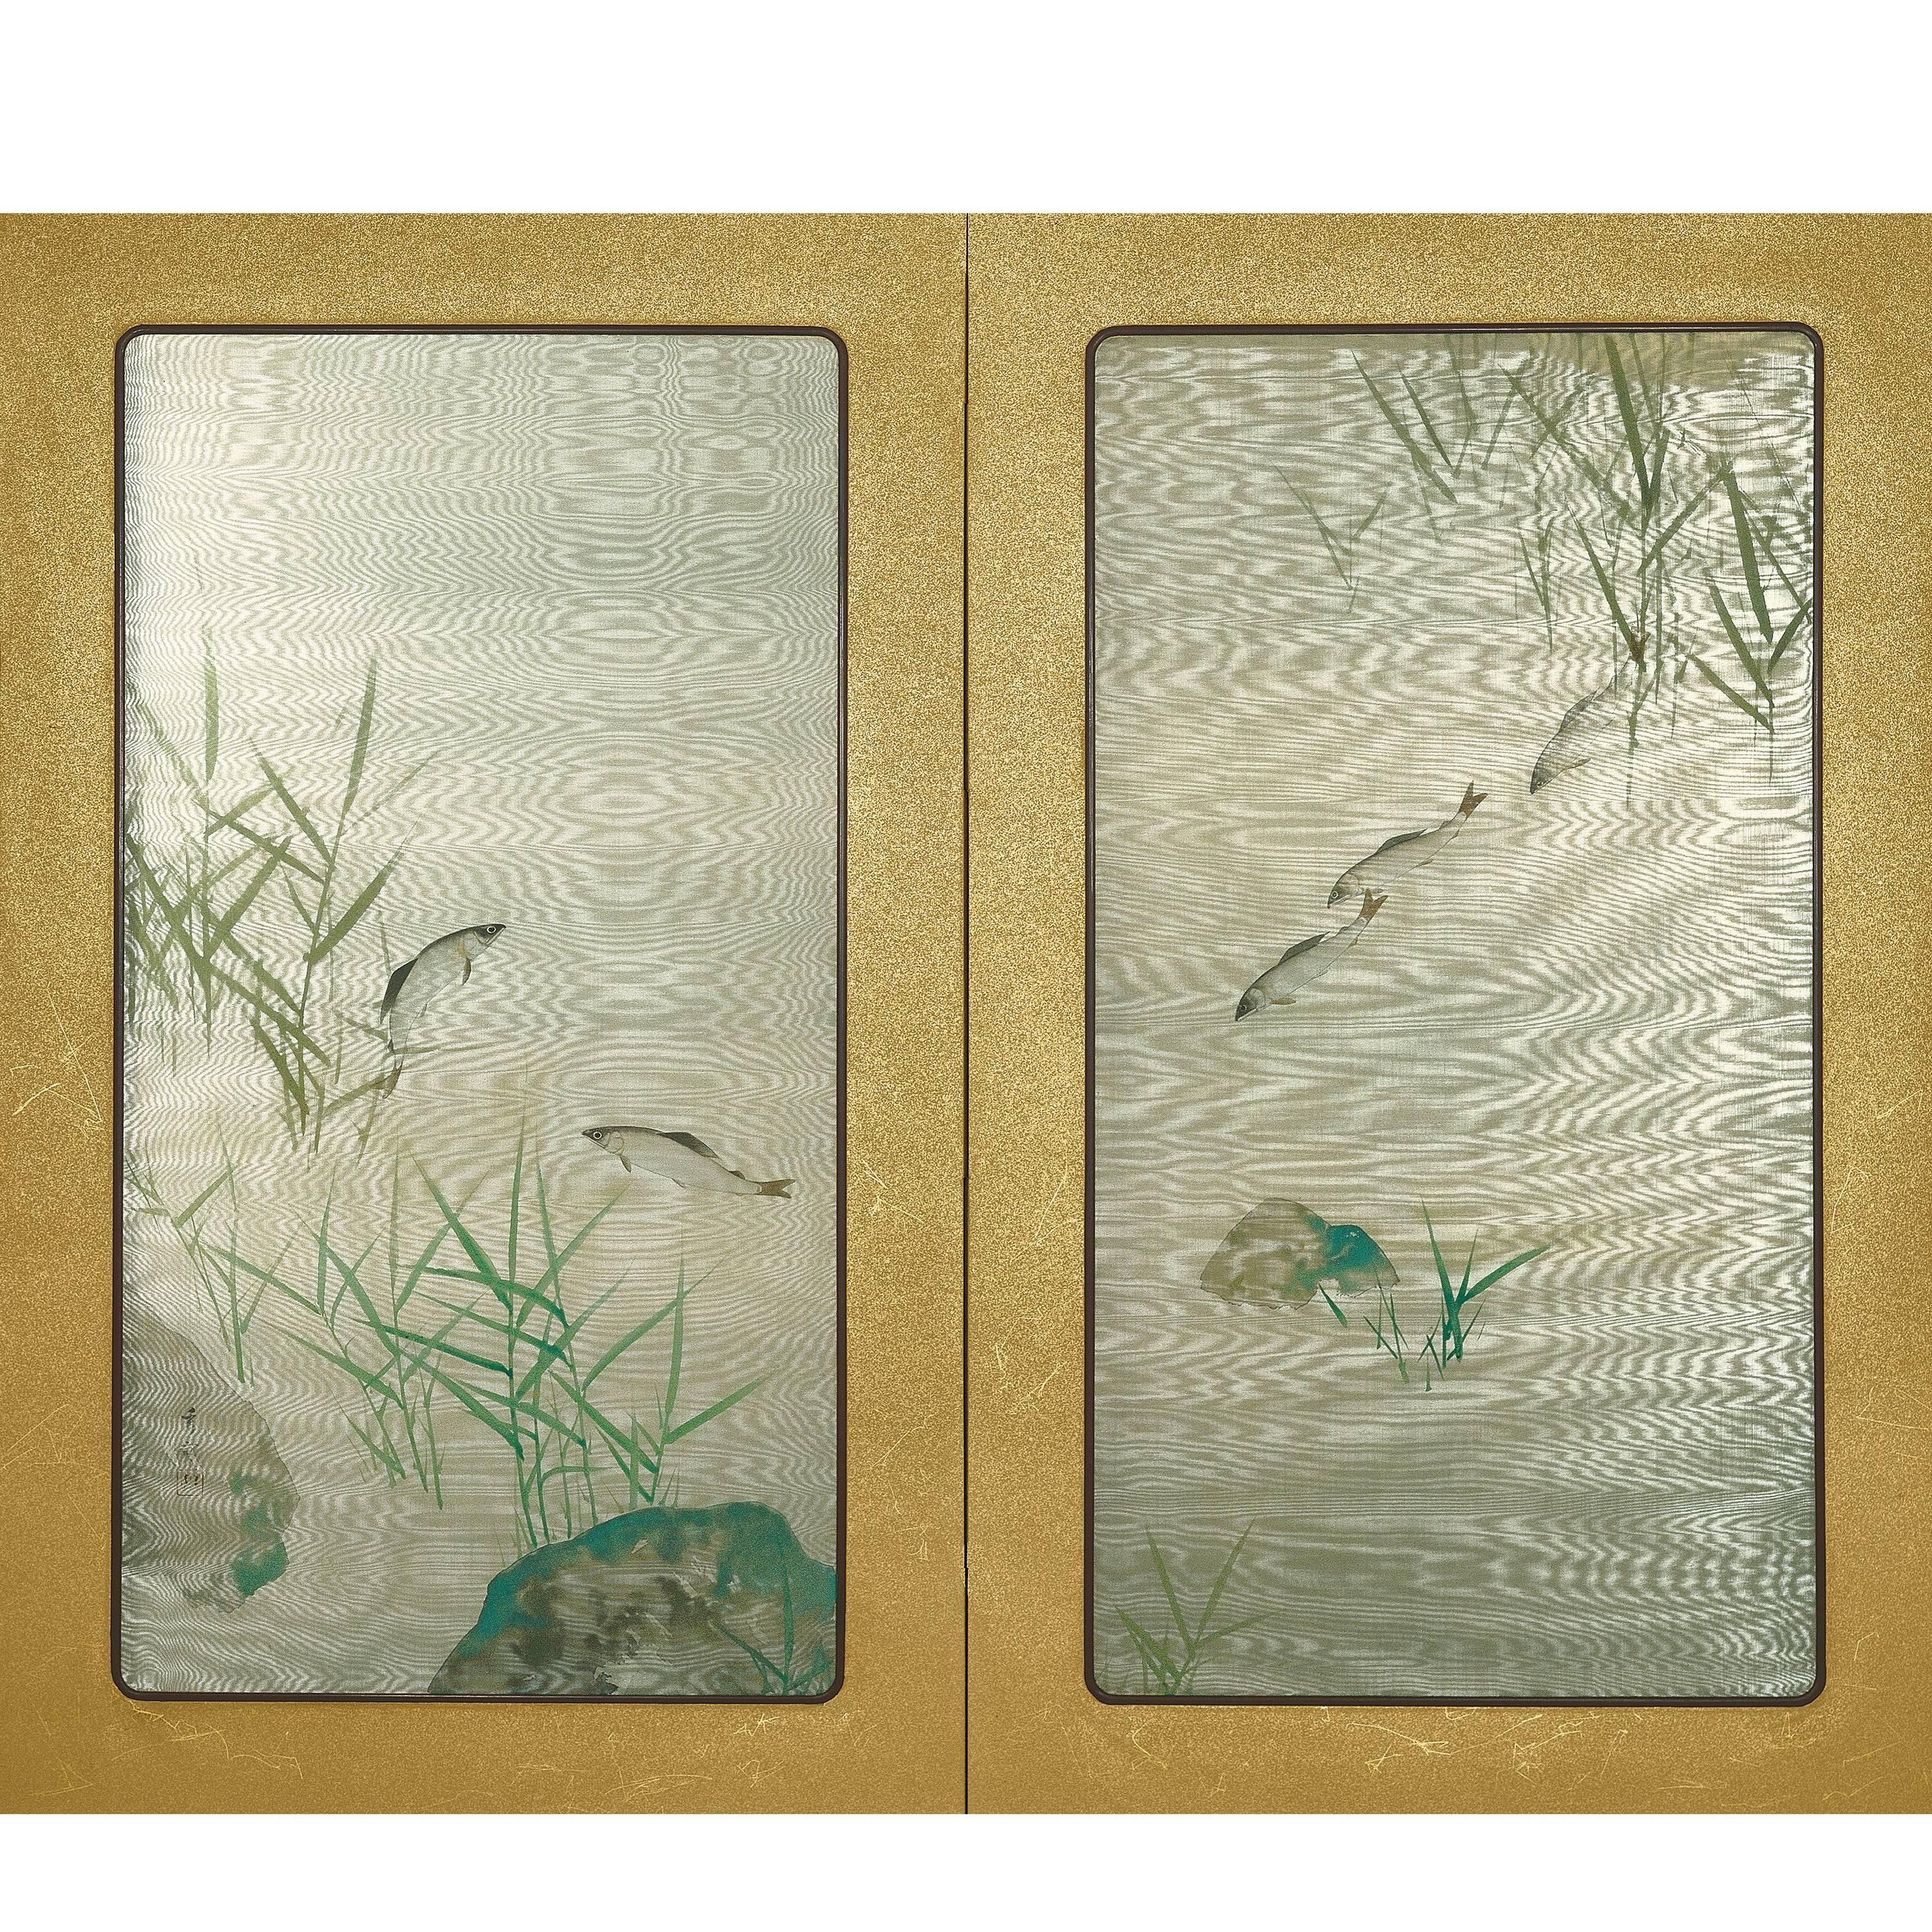 Ikegami Shuho 1938 Summer Screen Painting of a Stream For Sale